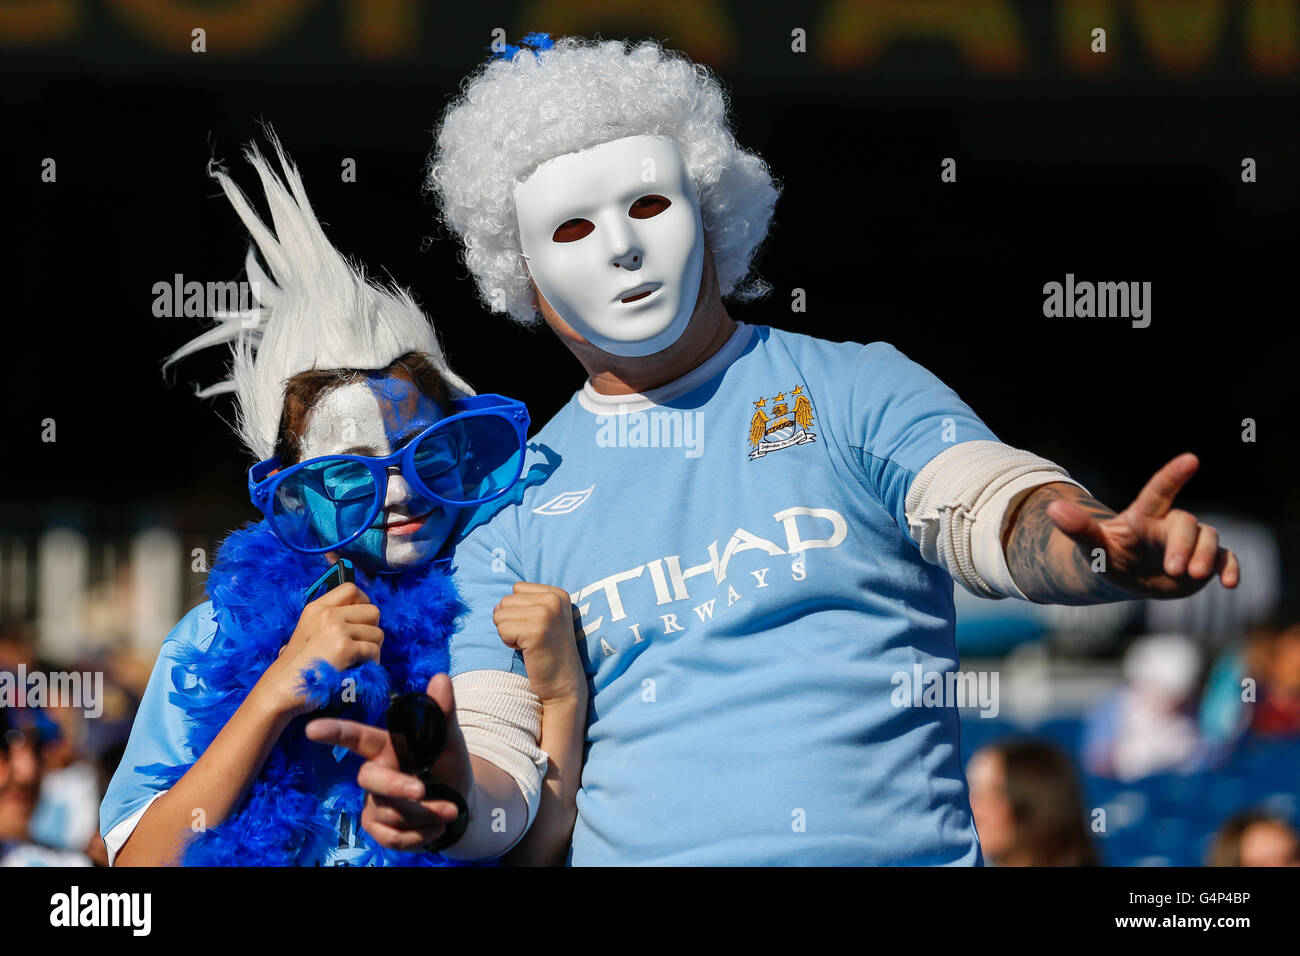 Foxborough, USA. 18th June, 2016. Supporters of Manchester City, which Sergio Aguero of Argentina plays for, gesture ahead of the quarterfinal match of 2016 Copa America soccer tournament against Venezuela at Gillette Stadium in Foxborough, MA, the United States, June 18, 2016. Argentina won 4-1. Credit:  Li Muzi/Xinhua/Alamy Live News Stock Photo